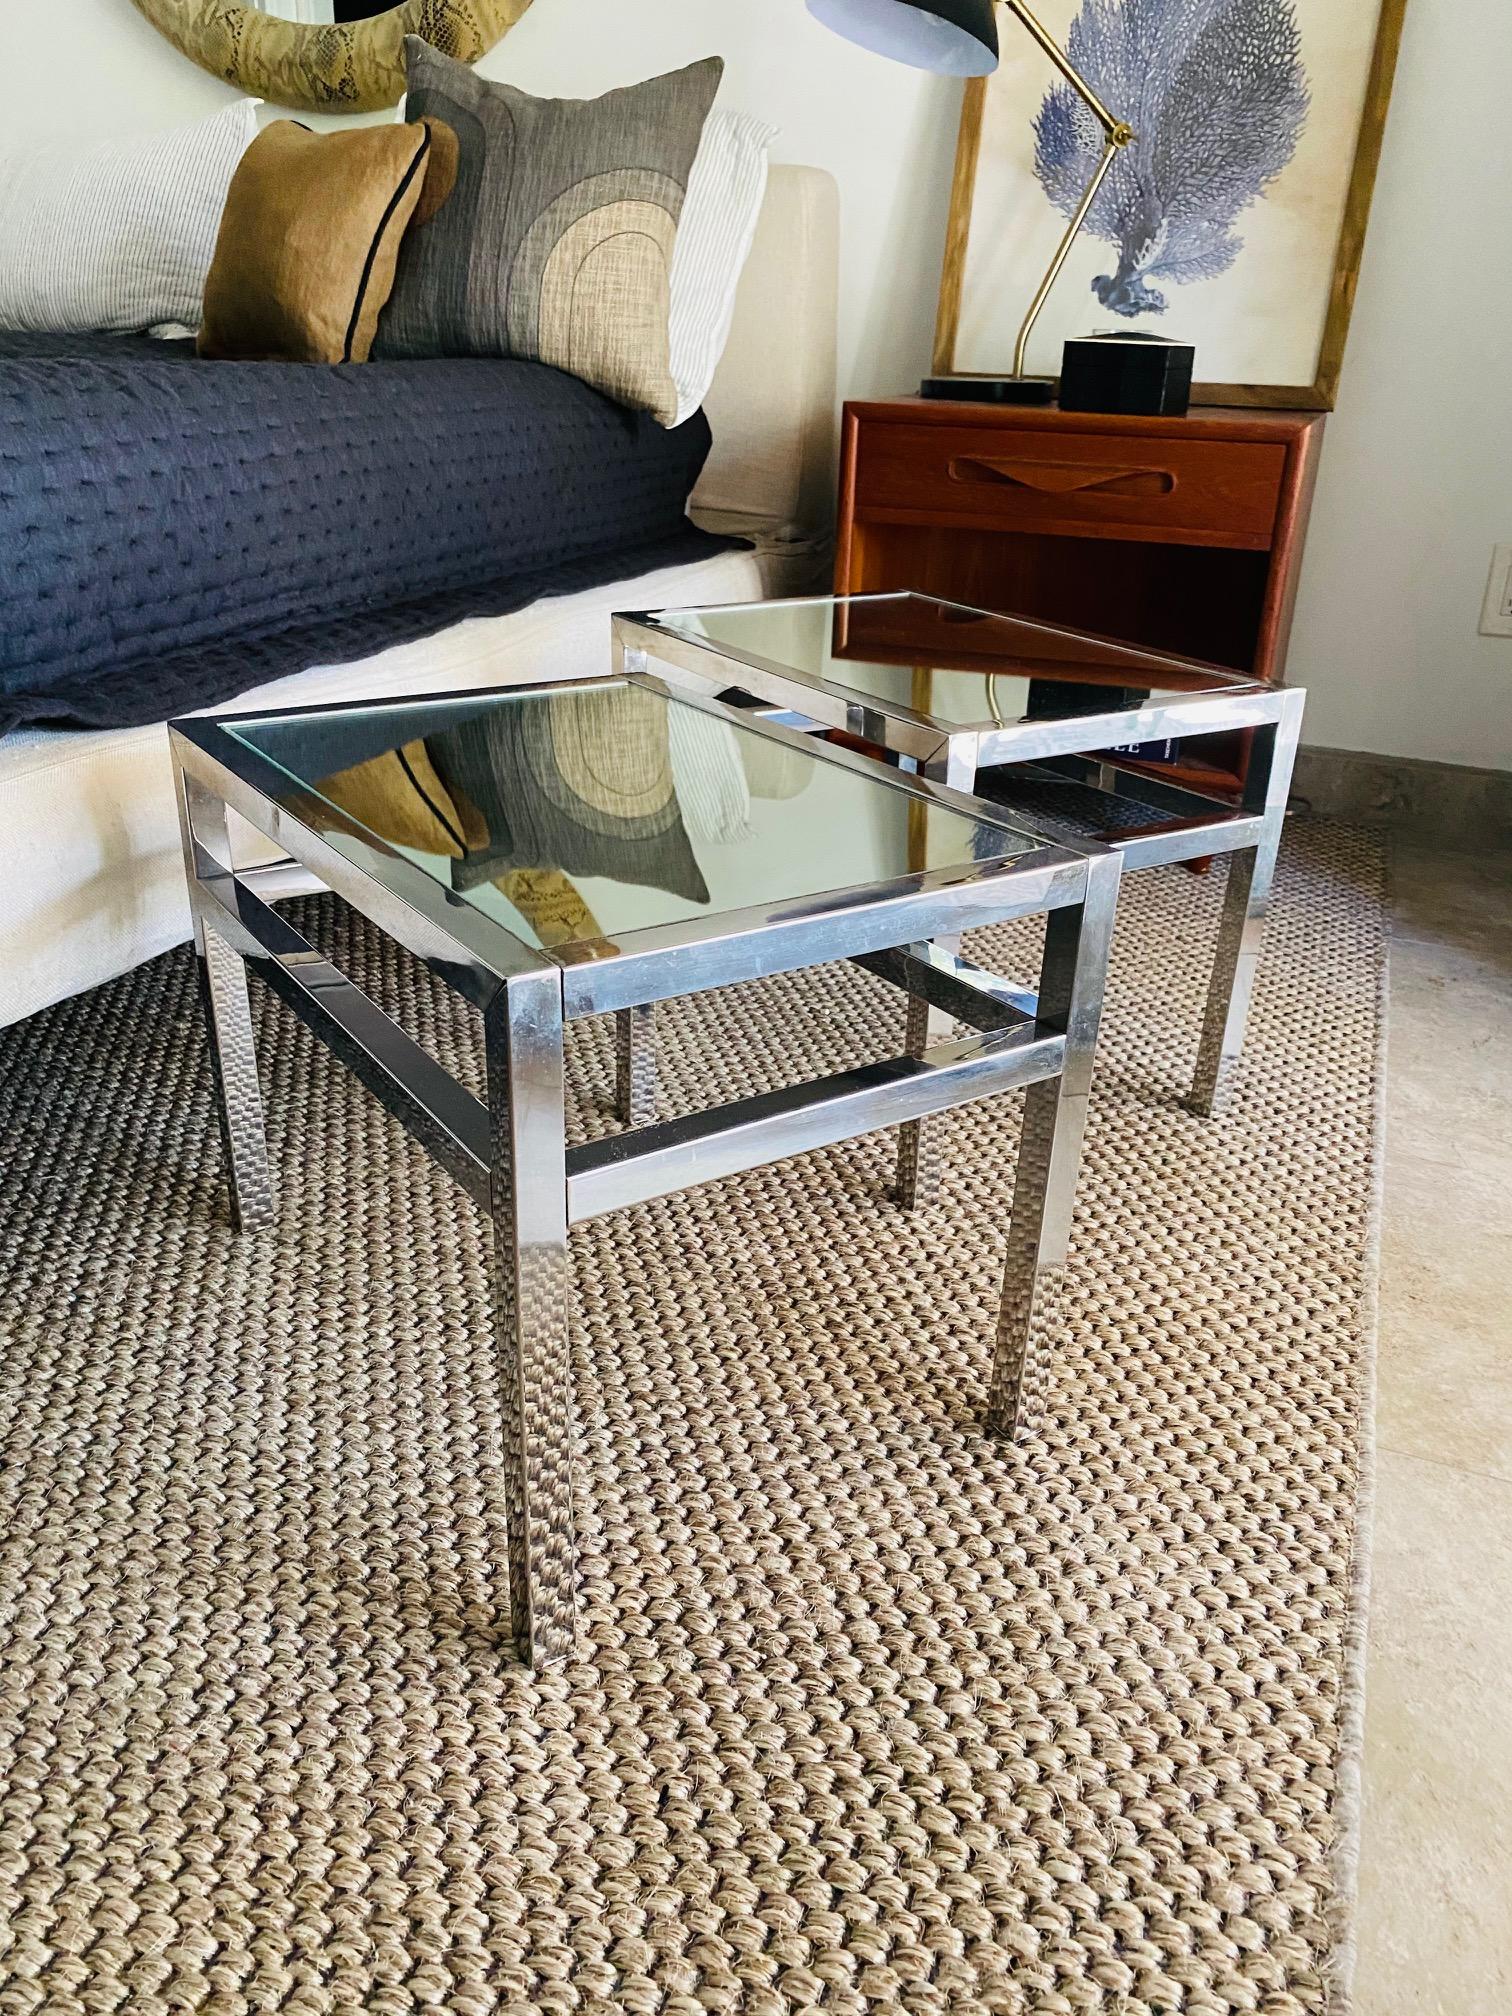 Mid-Century Modern Pair of Chrome and Mirrored Side Tables in the style of Milo Baughman, c. 1970's For Sale